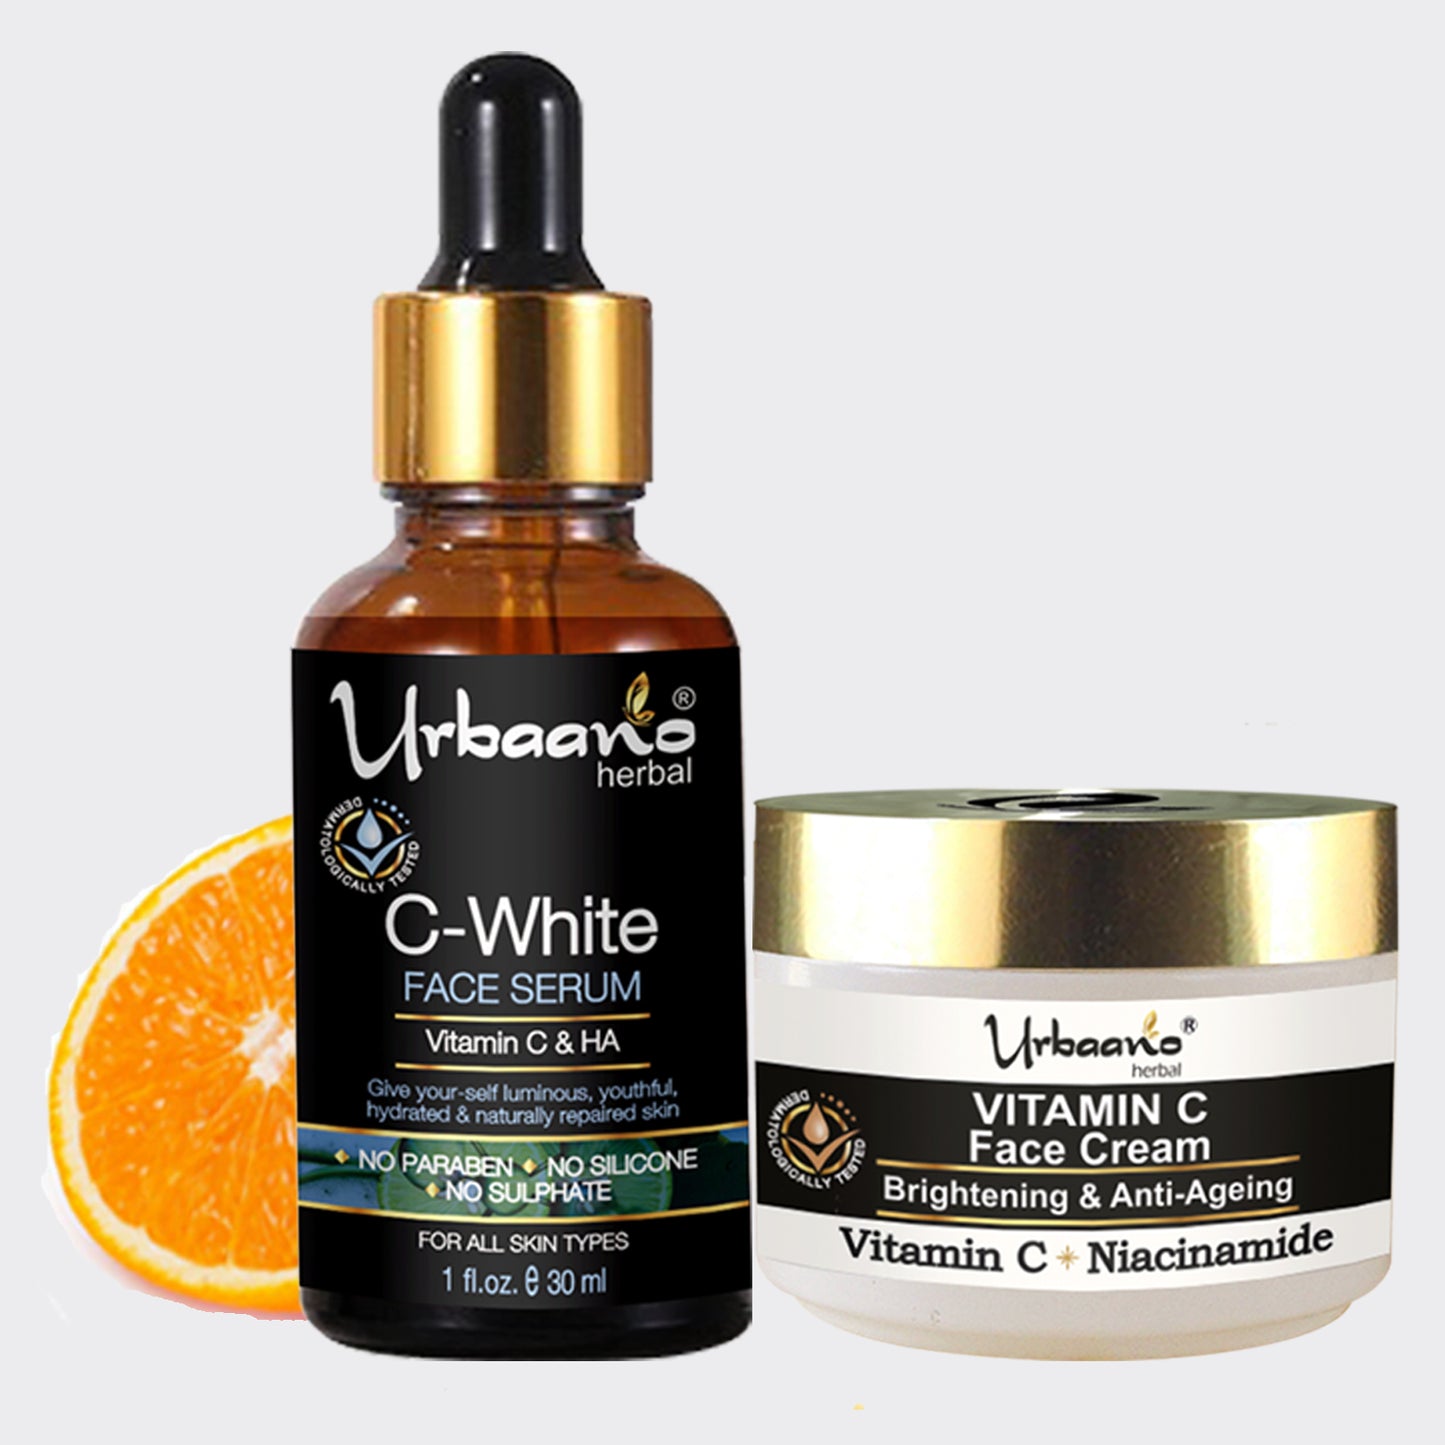 urbaano herbal vitamin c skin care kit, face serum, face cream with niacinamide, hyaluronic acid for brightening, and firming agleless skin